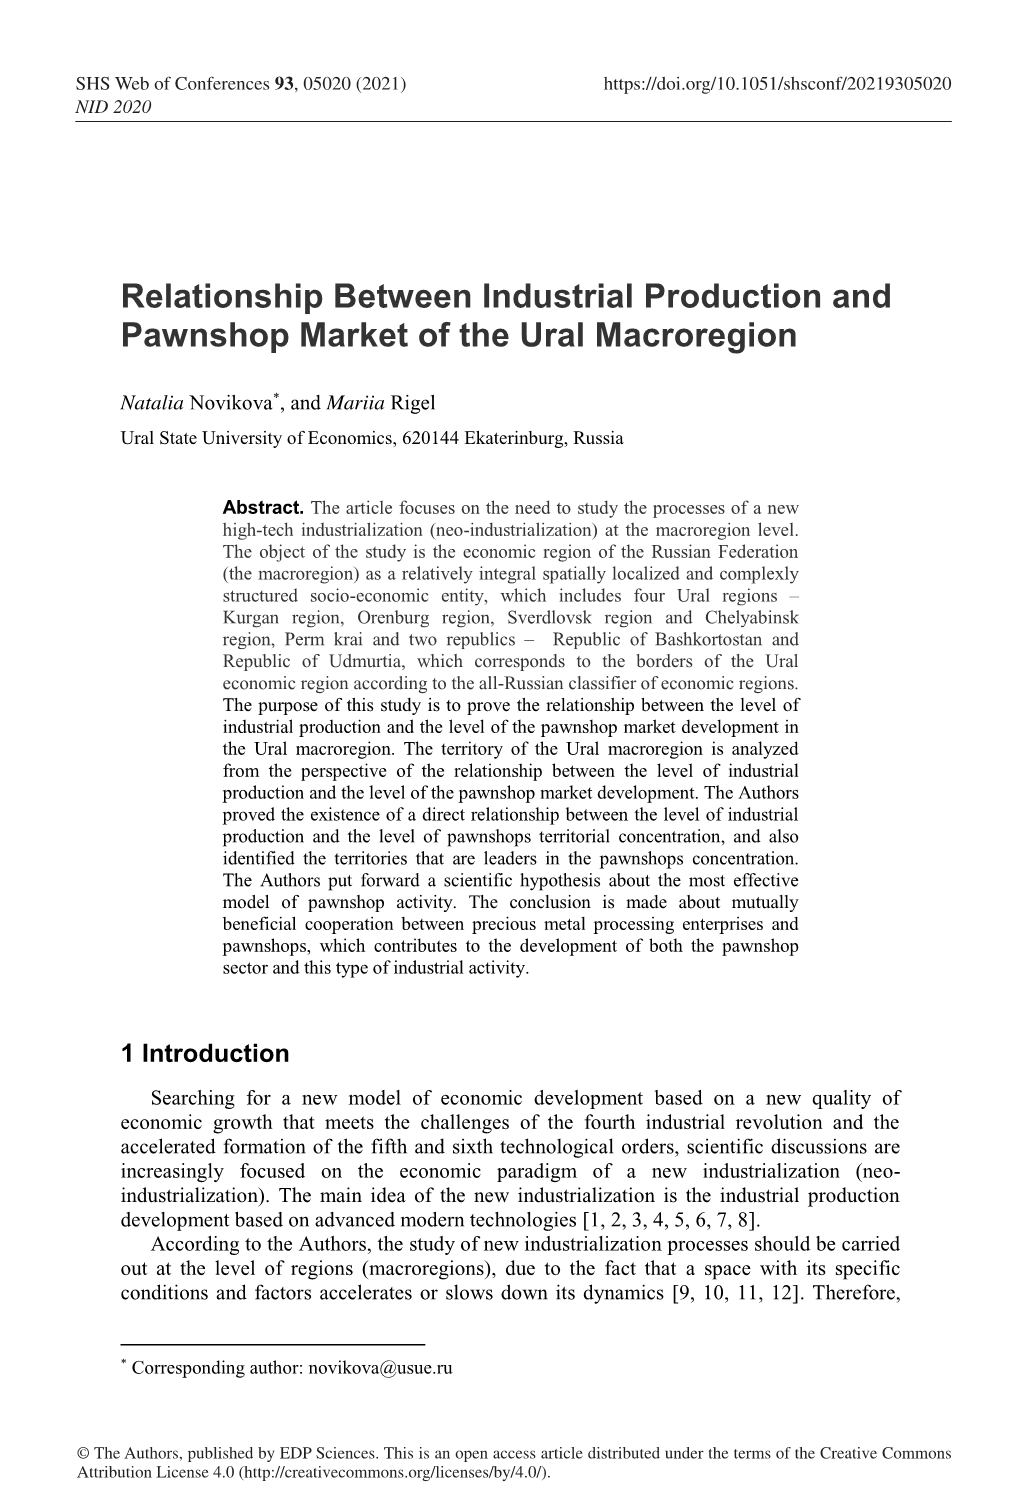 Relationship Between Industrial Production and Pawnshop Market of the Ural Macroregion